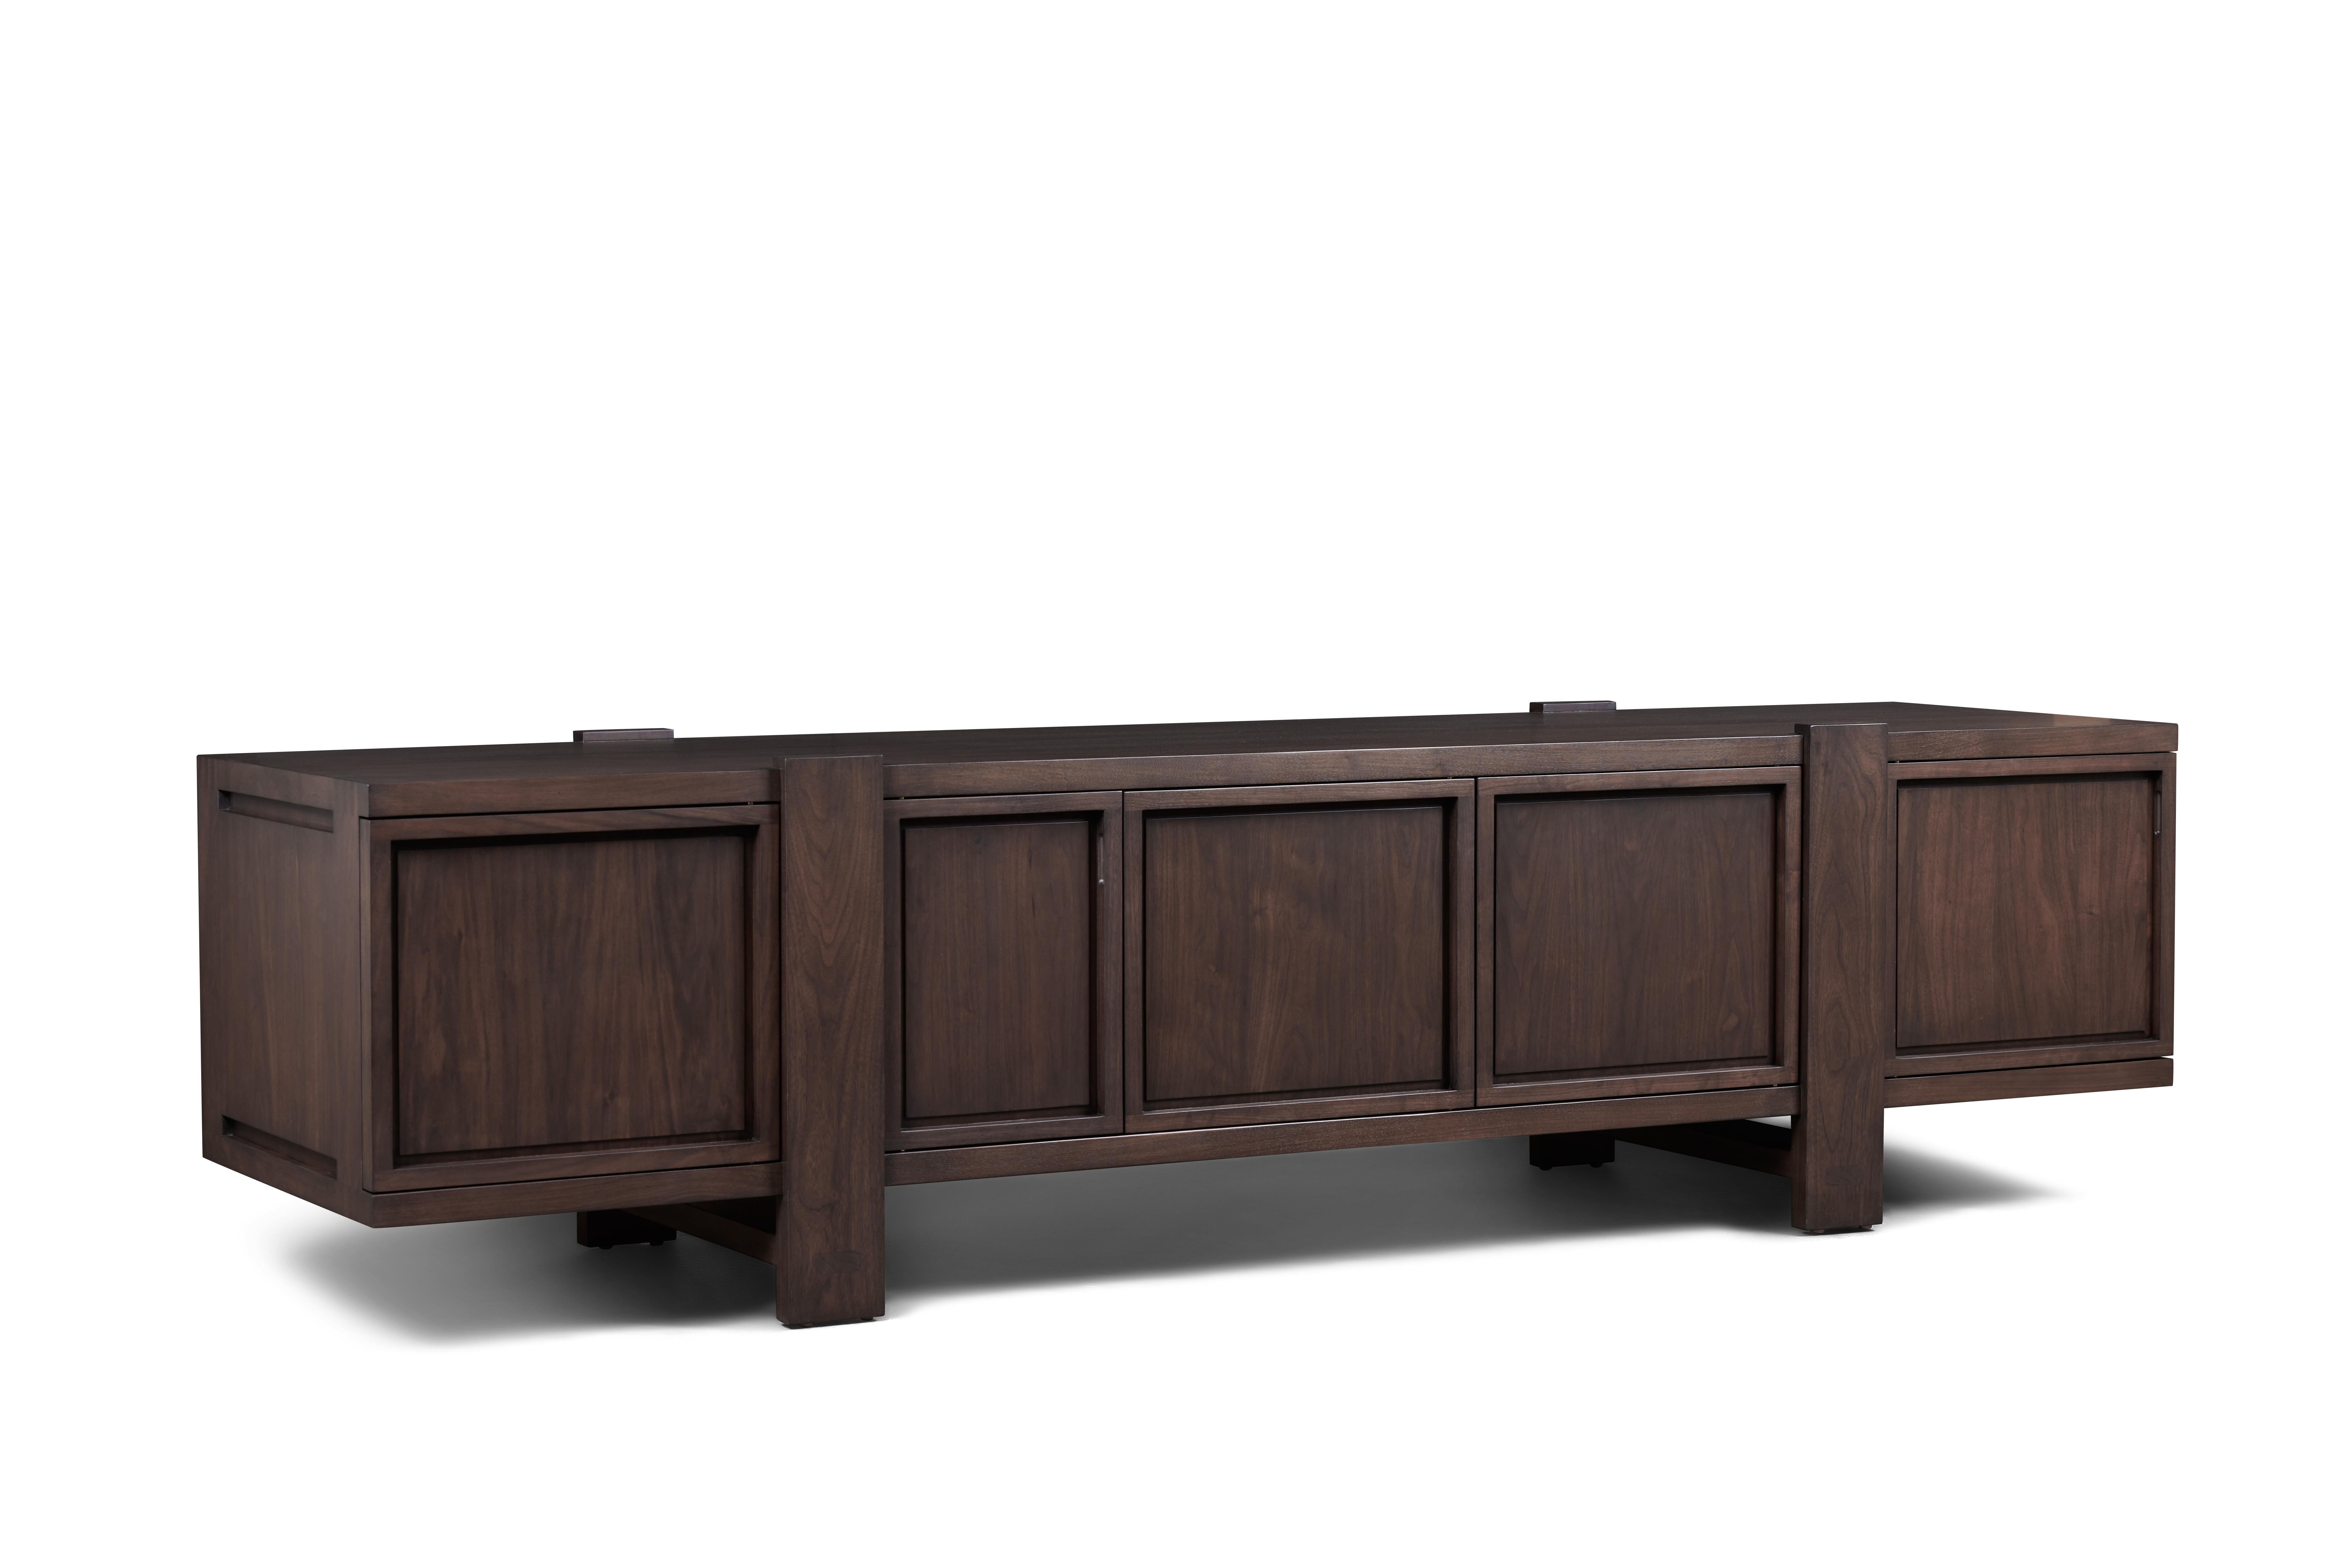 Our artisan-made Lake Credenza is an extra-wide storage piece with a lower overall height, making it ideally suited for use as a credenza or media cabinet. 

Designs are inspired by iconic mid-century French pieces, with a distinctly California